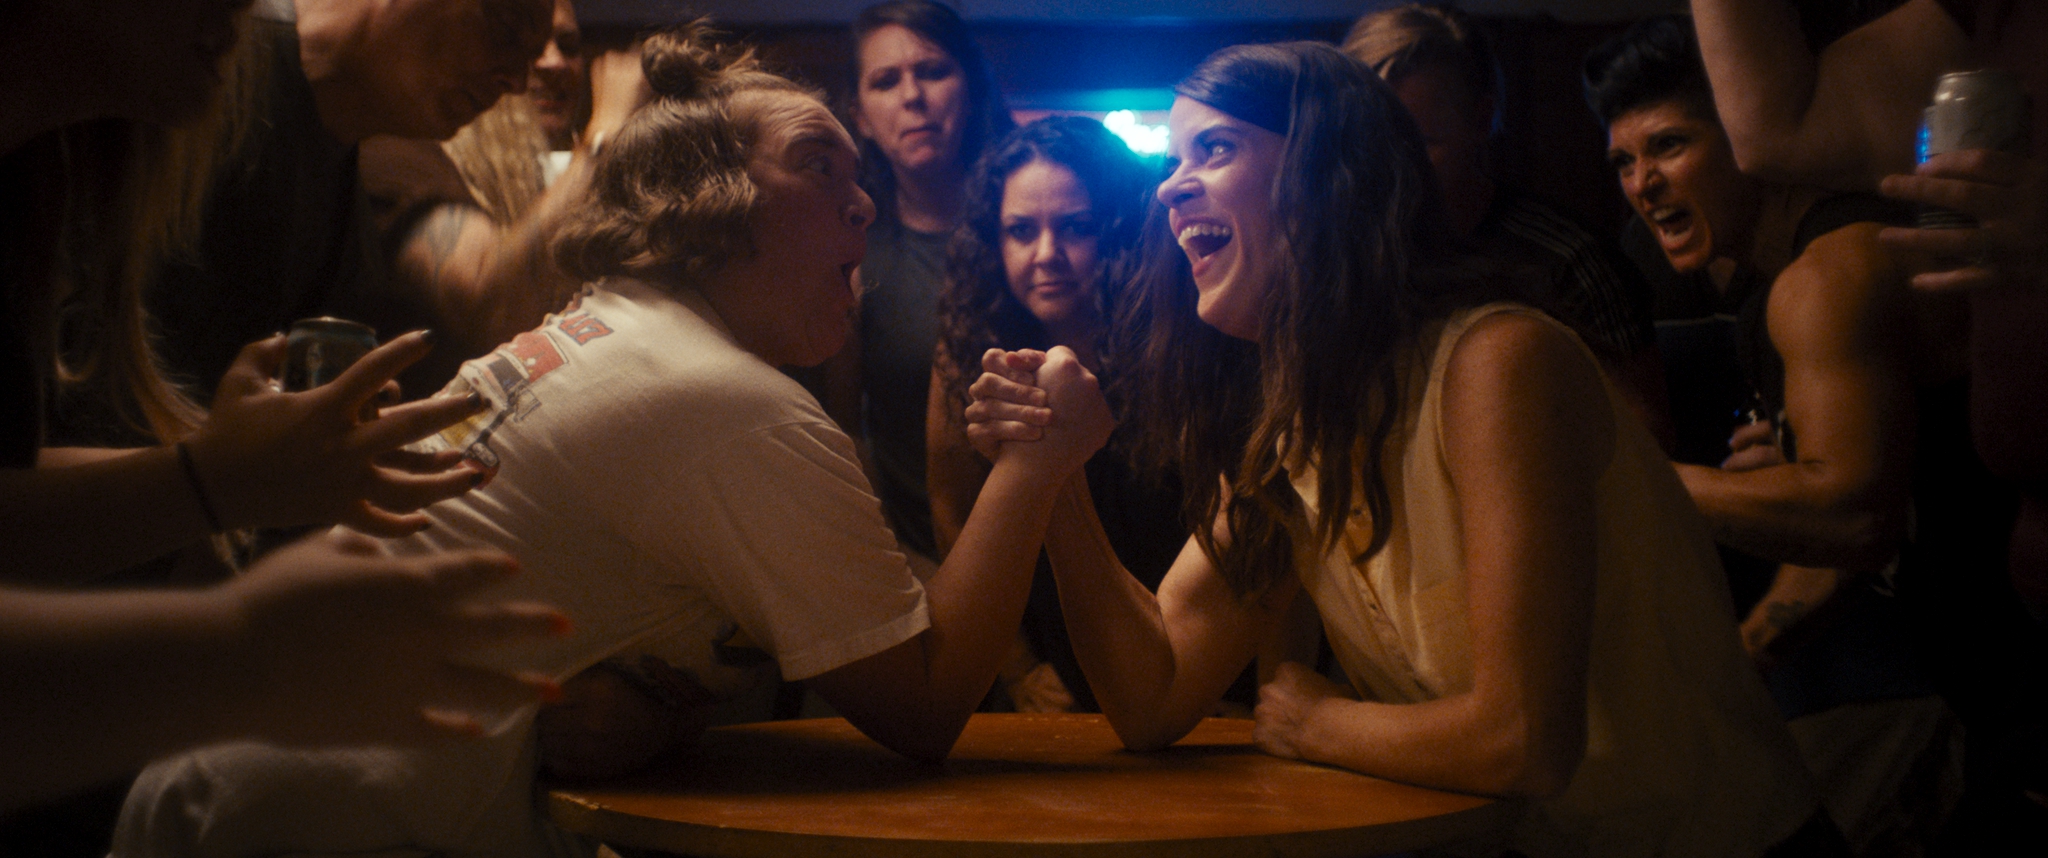 Ann Marie Allison and Jenna Milly on Writing a Female Arm-Wrestling Story in Golden Arm [Exclusive Interview]